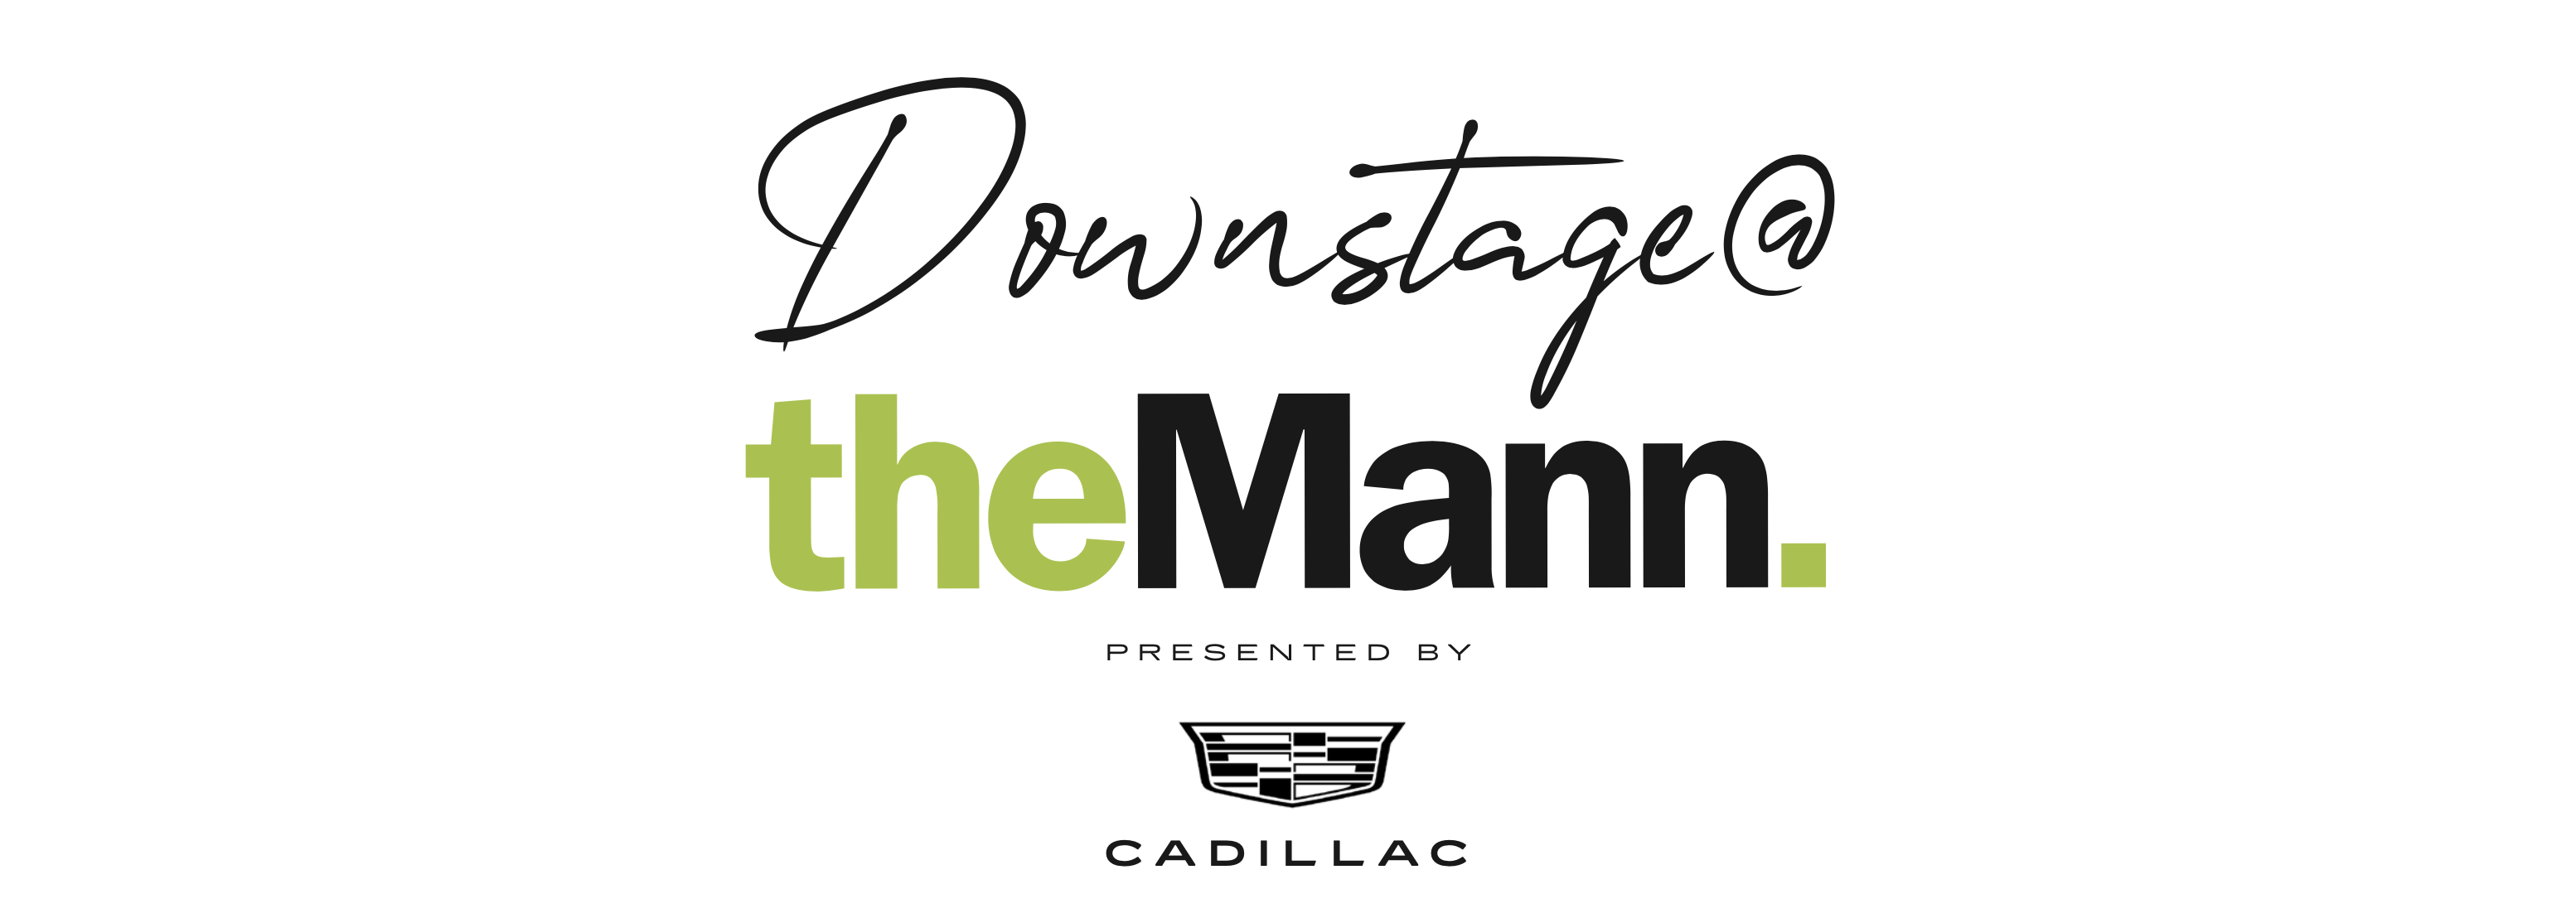 Downstage @ the Mann Presented by Cadillac